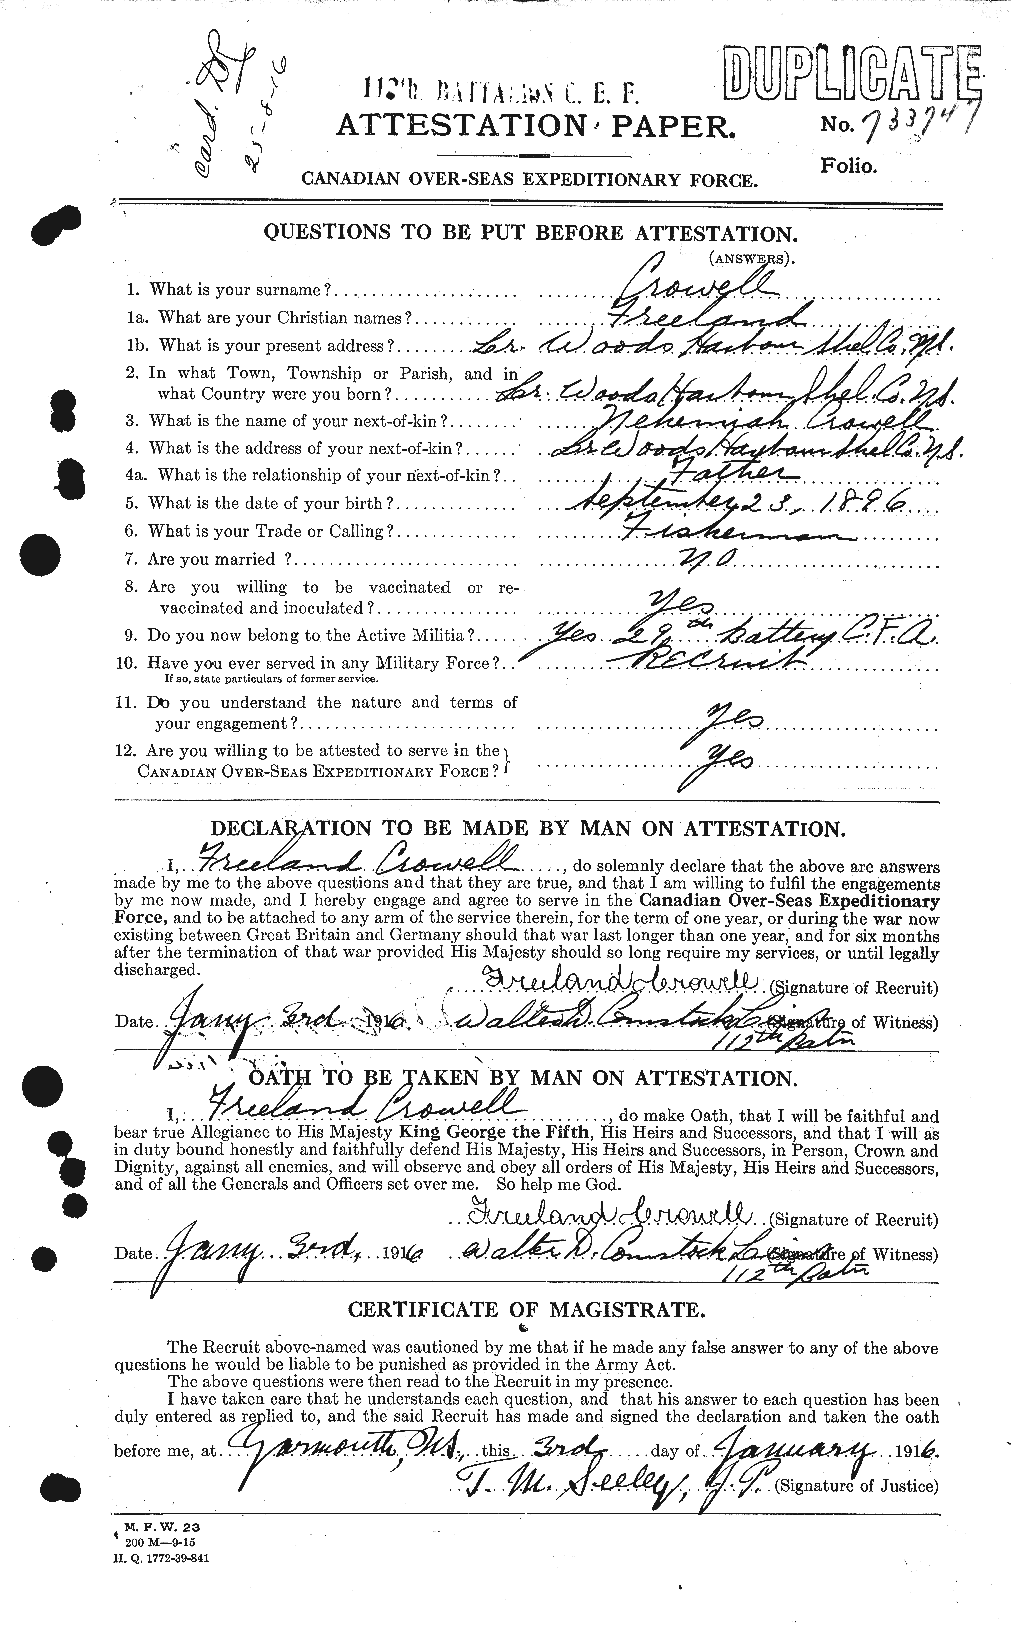 Personnel Records of the First World War - CEF 067954a